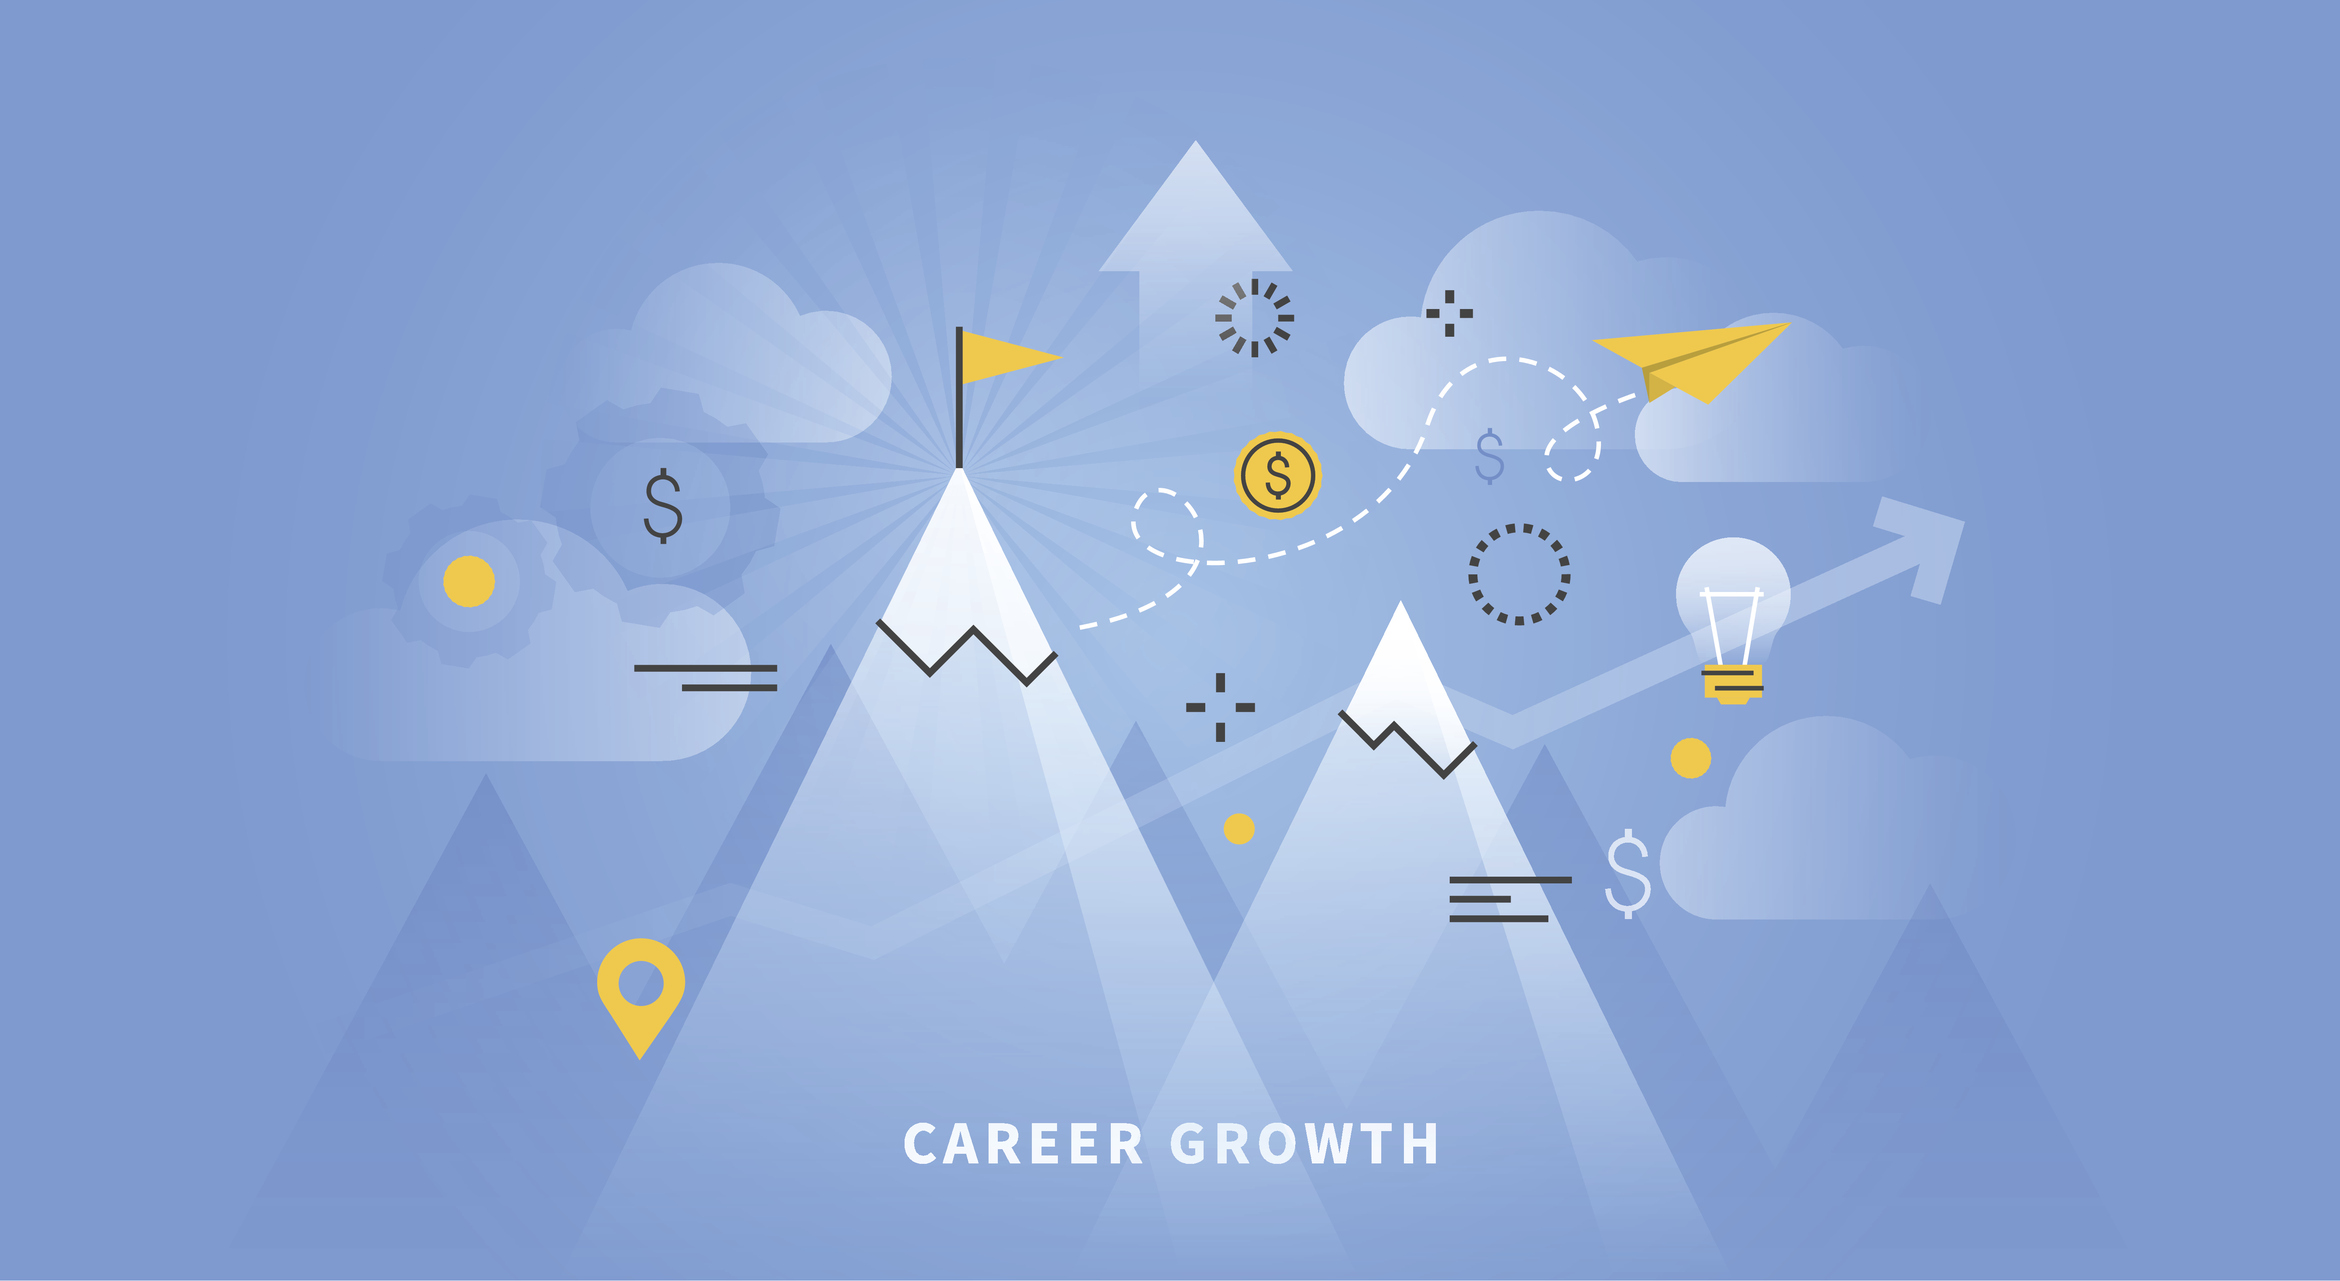 illustrated mountains with business symbols and text "career growth"